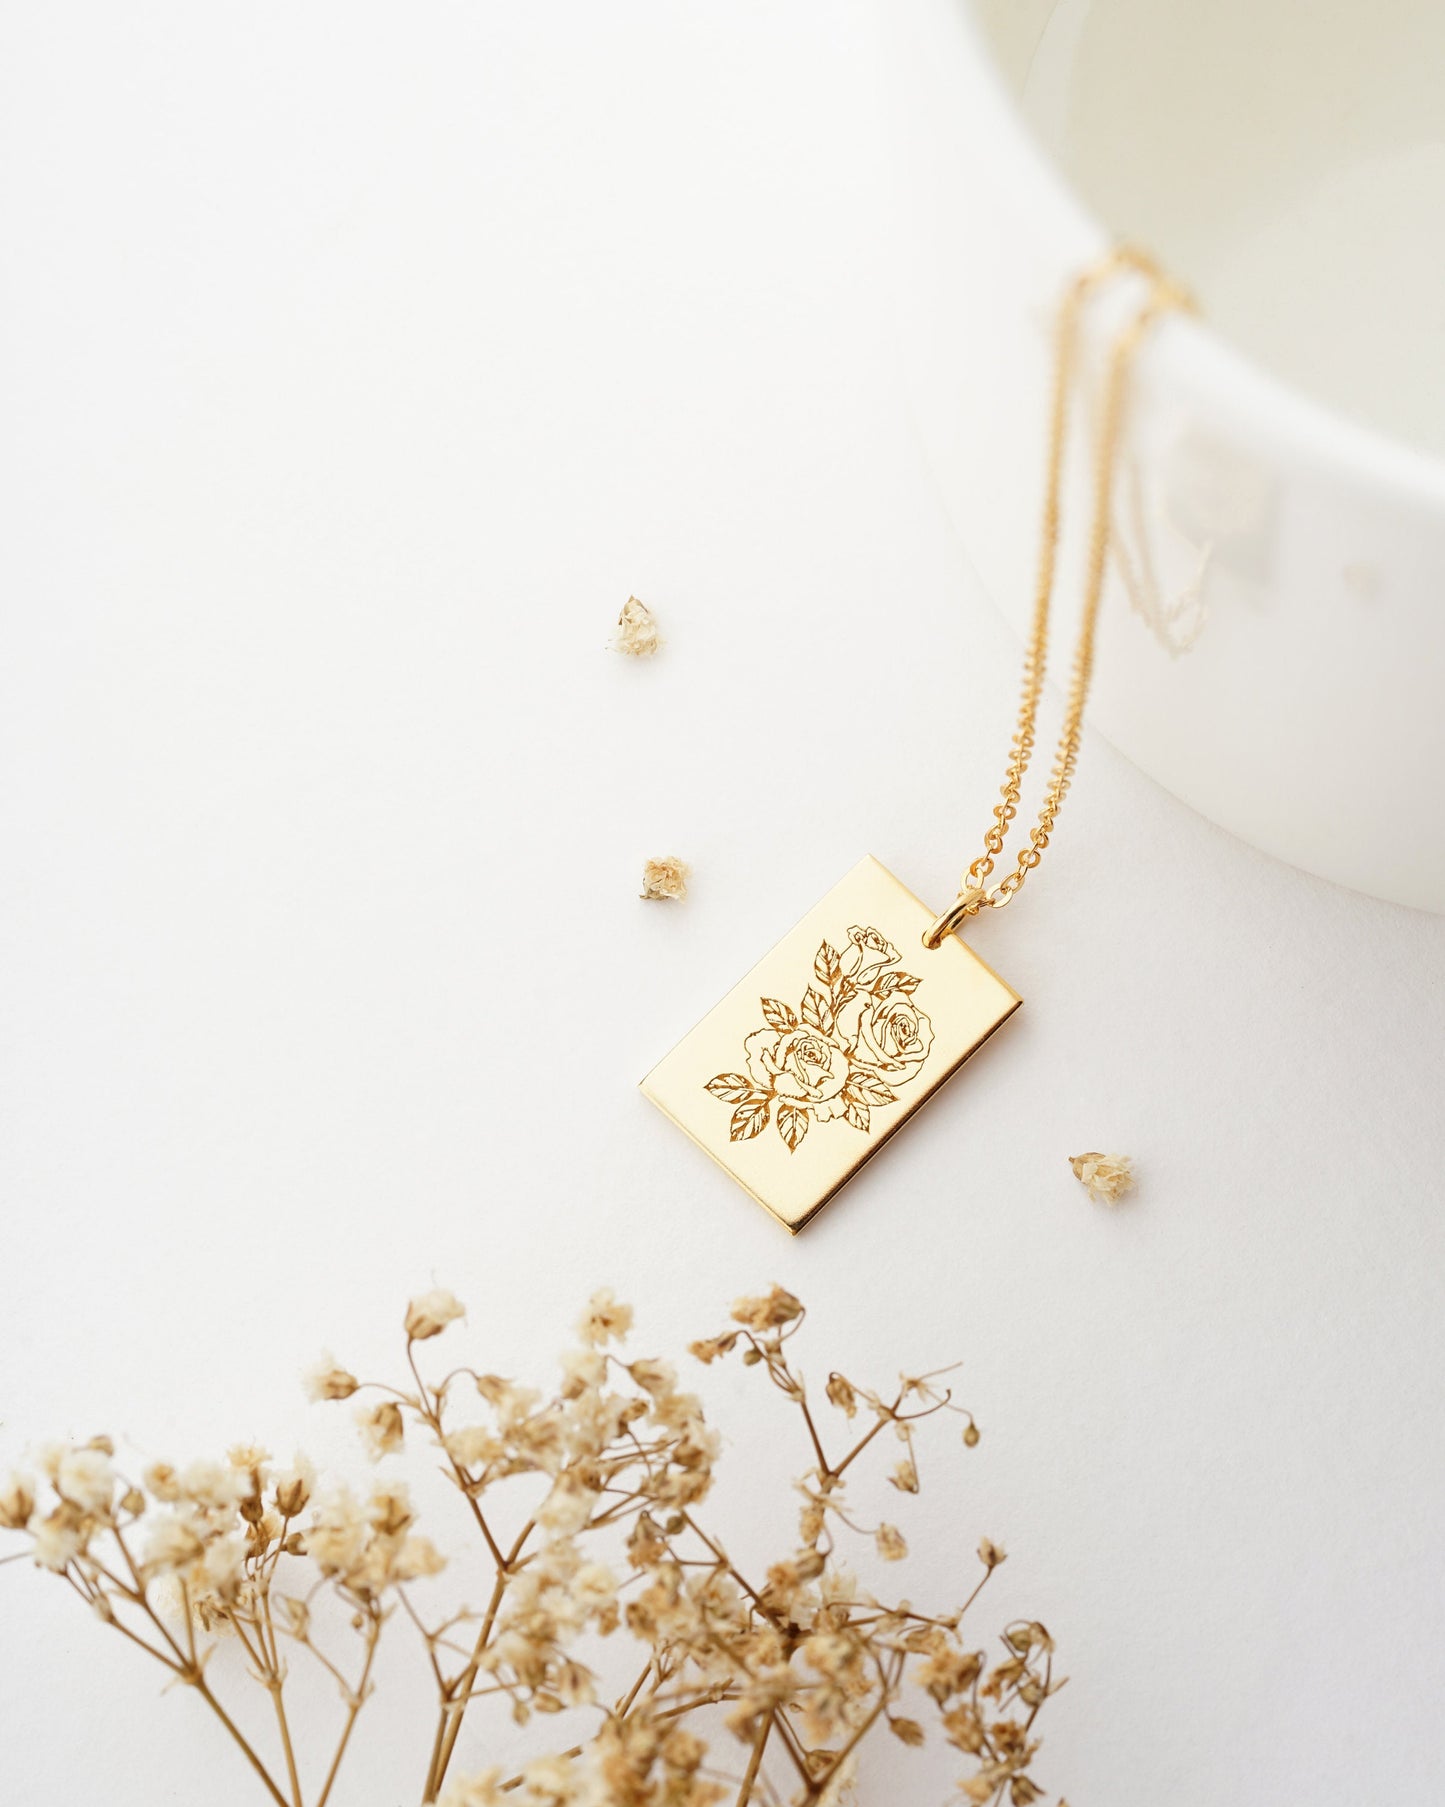 Birth Flower Necklace | Personalized Mother's Day Gift | Mother Daughter Necklace | Gold Filled Necklace | Delicate Custom Necklace for Mom